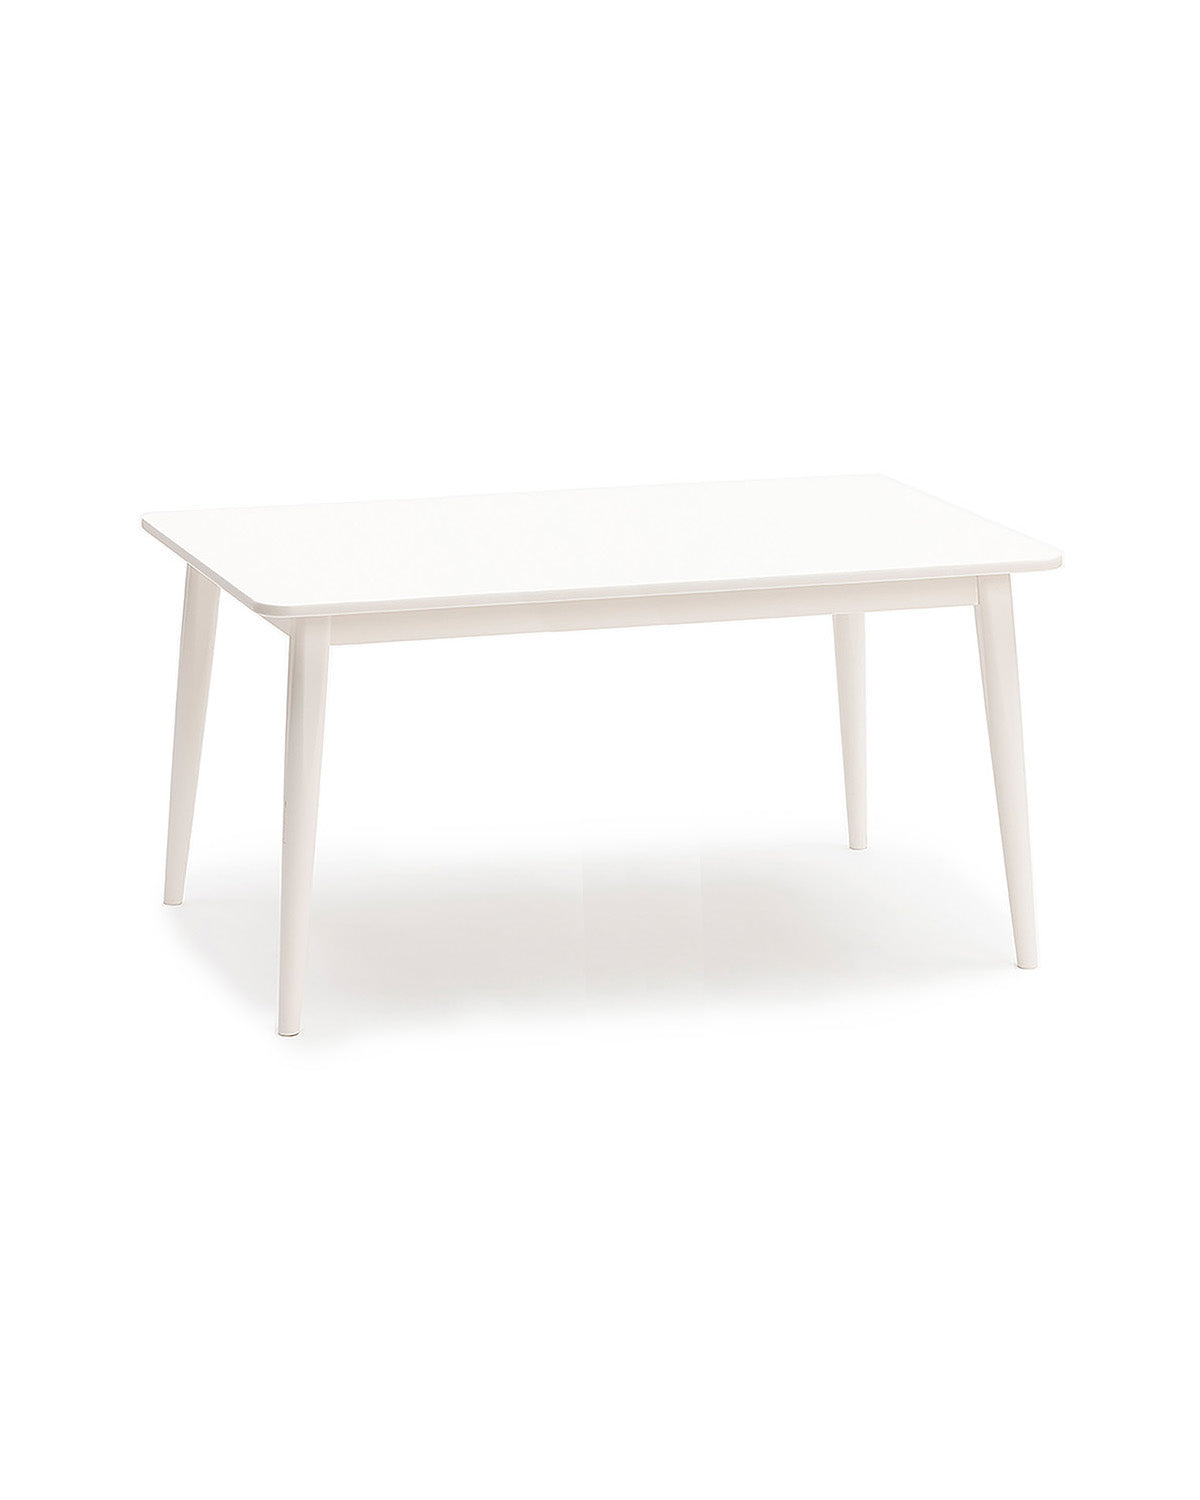 Milton & Goose Crescent table 48" in length in white.